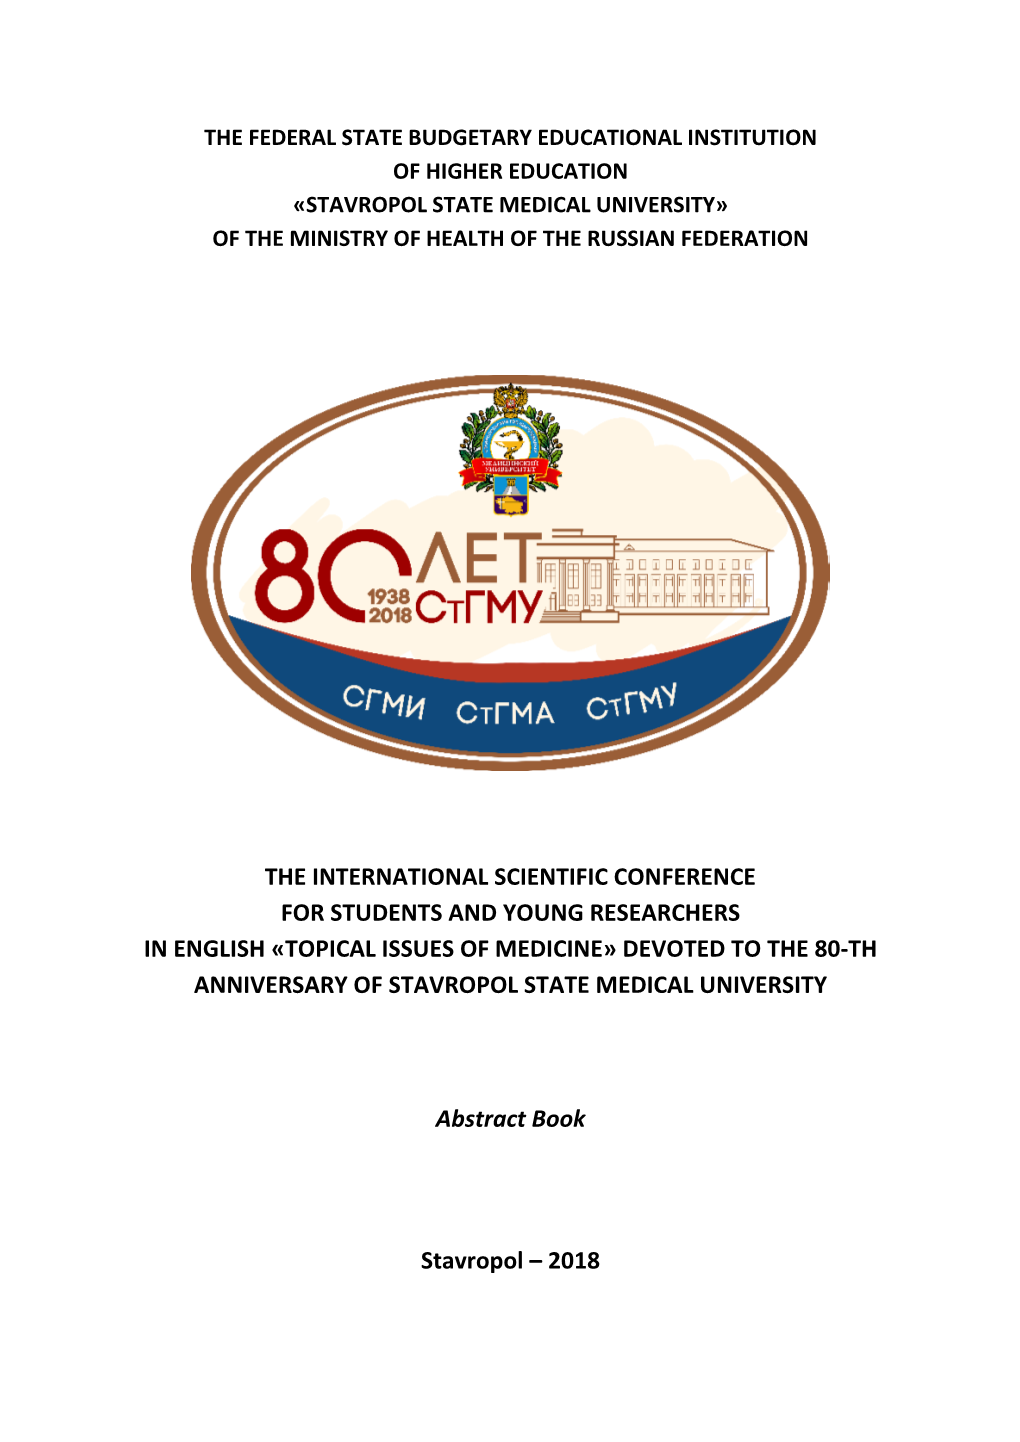 Topical Issues of Medicine» Devoted to the 80-Th Anniversary of Stavropol State Medical University